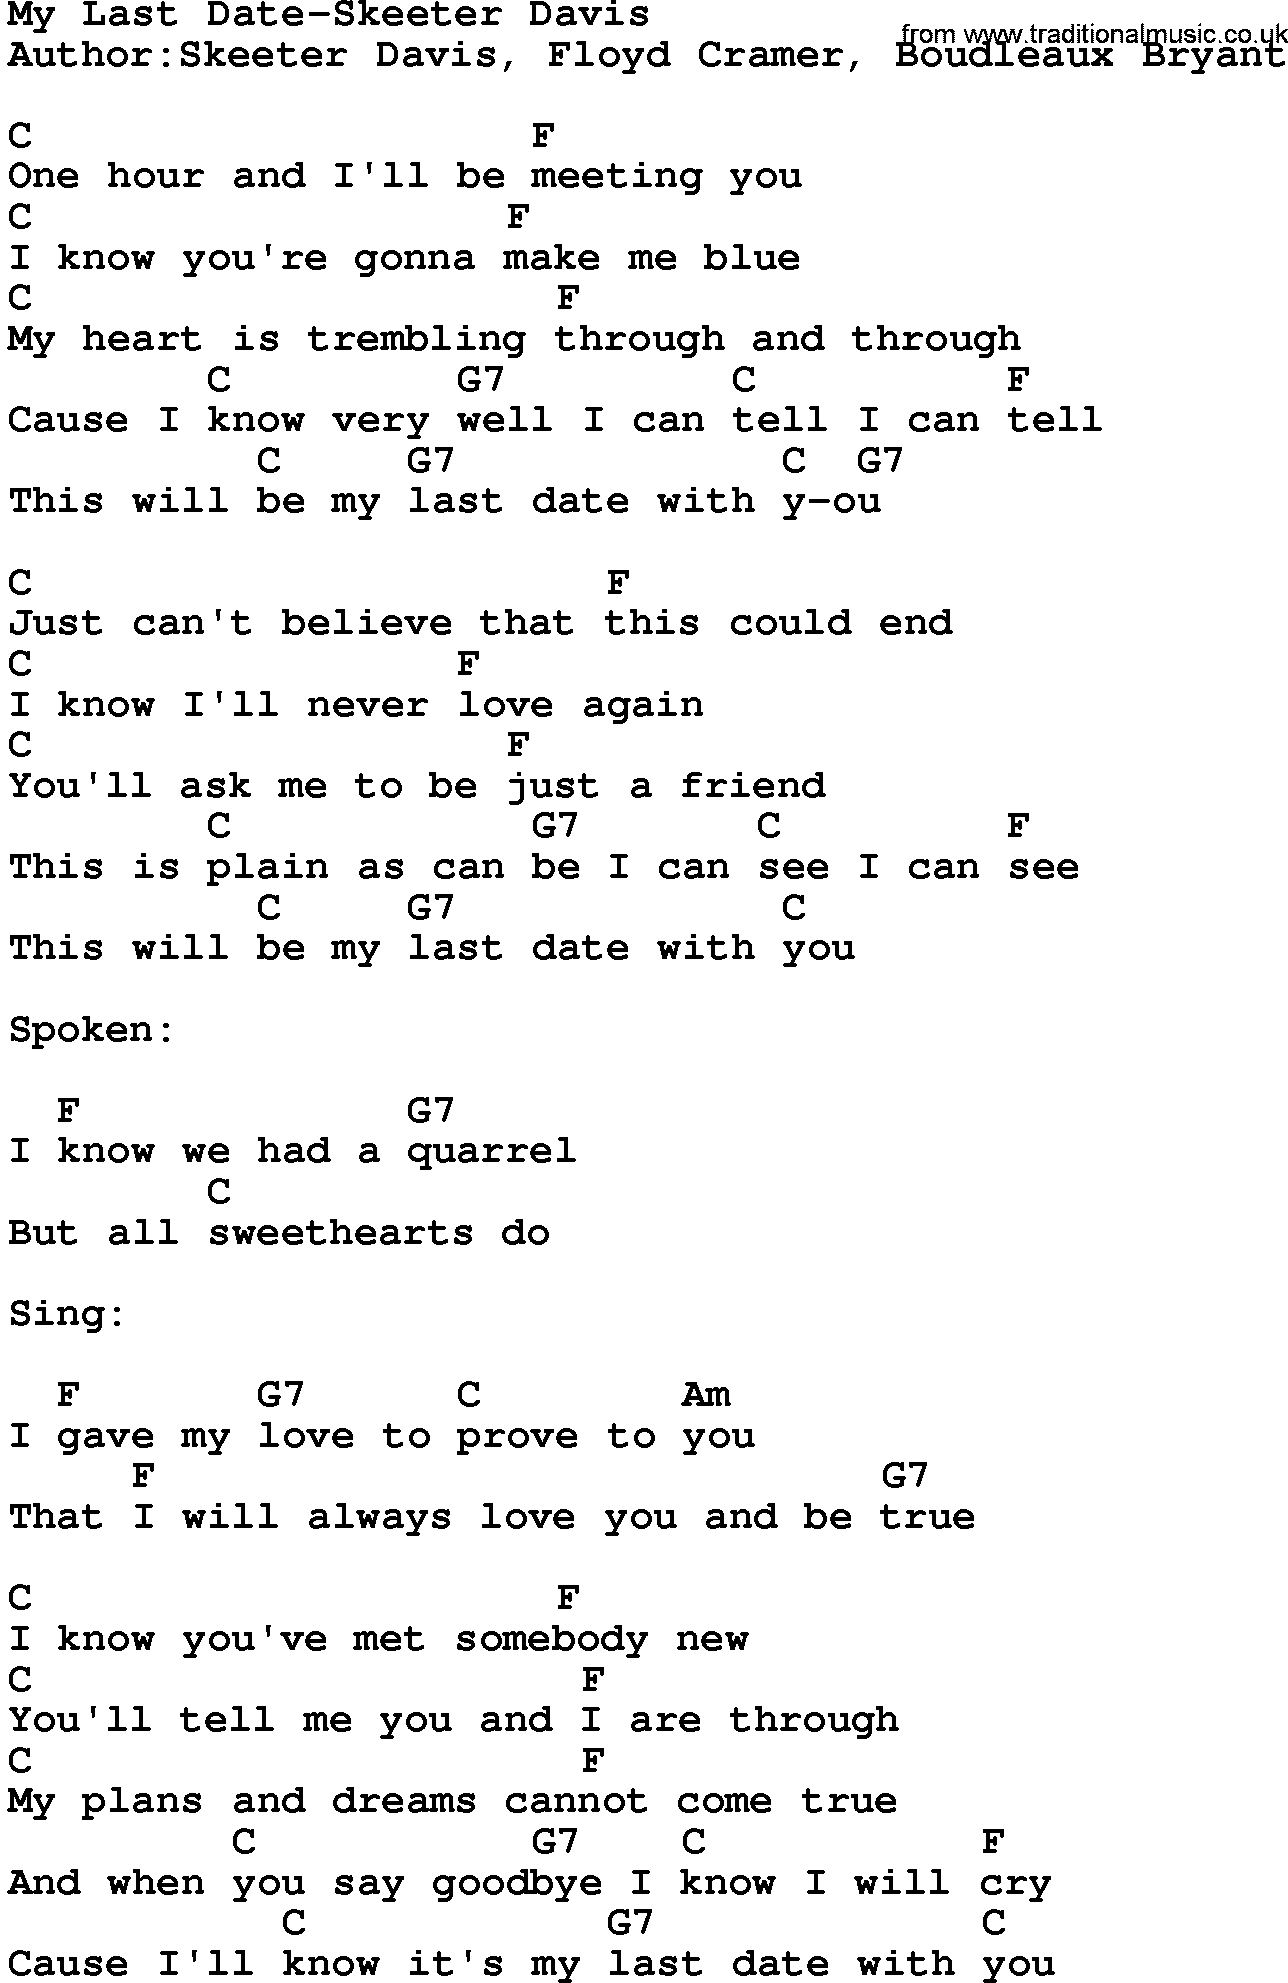 Country music song: My Last Date-Skeeter Davis lyrics and chords